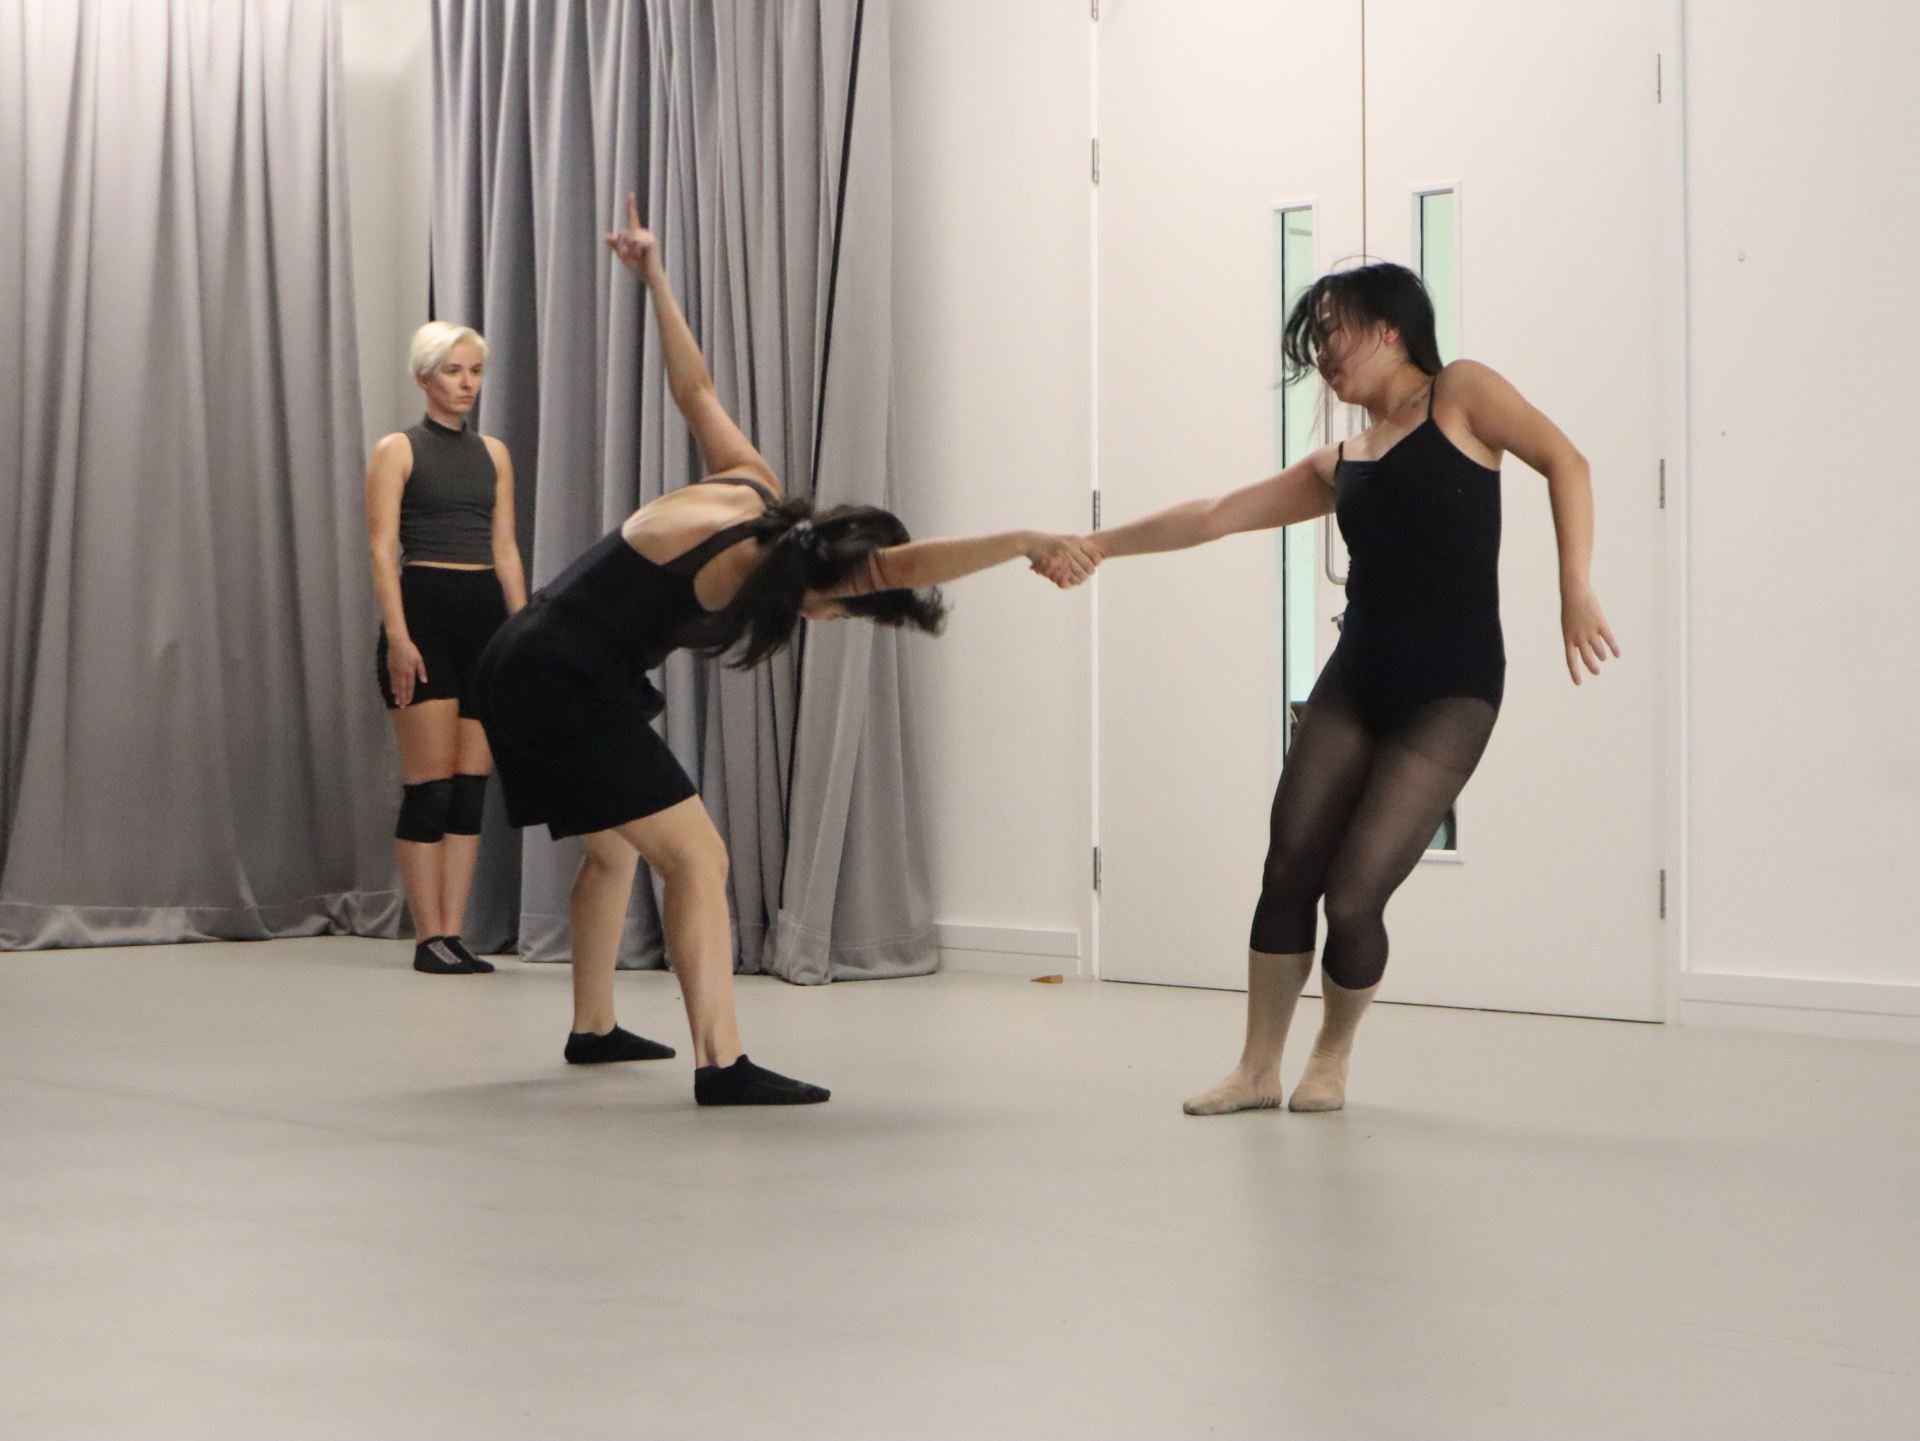 Documentation of three people physically performing in a grey room.